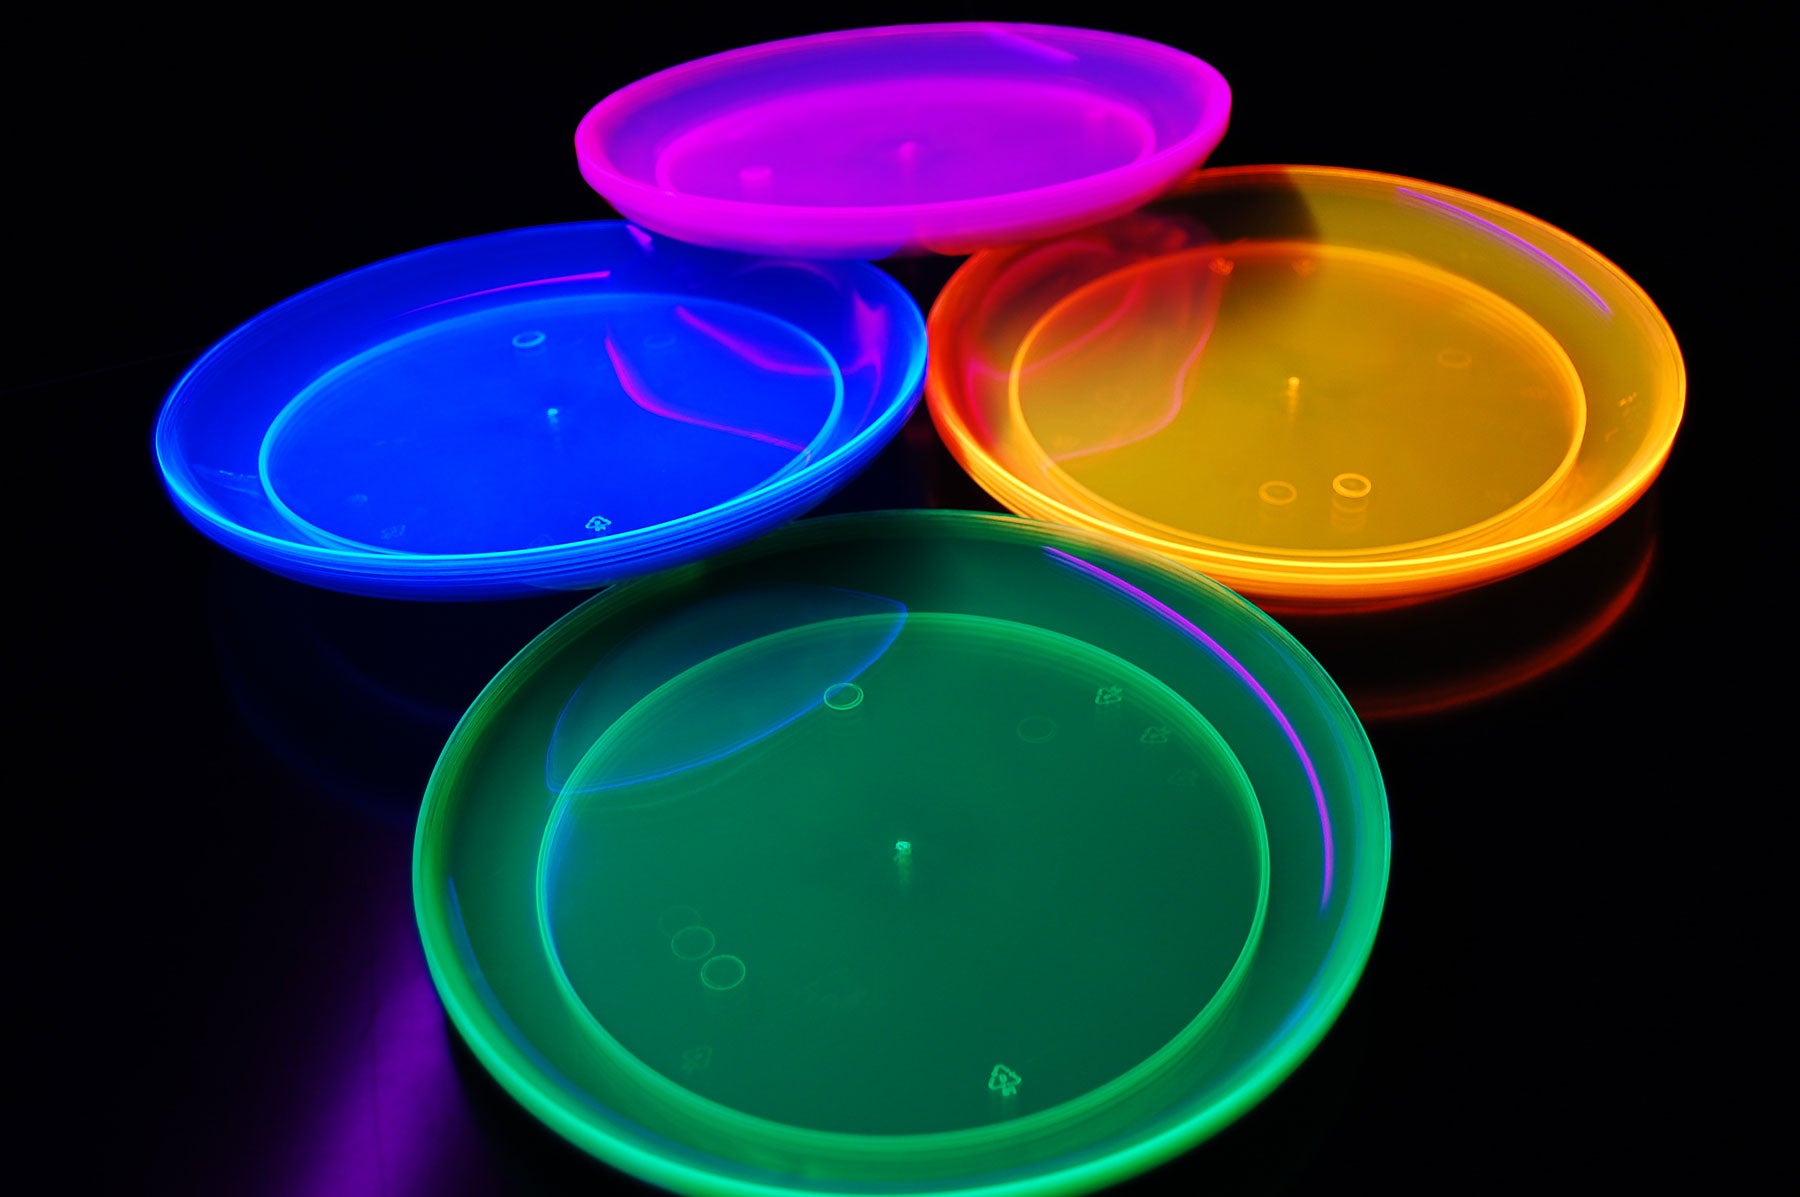 Exquisite Black Light Glow Party Plates - 9 Inch. - Assorted Colors - 60  count